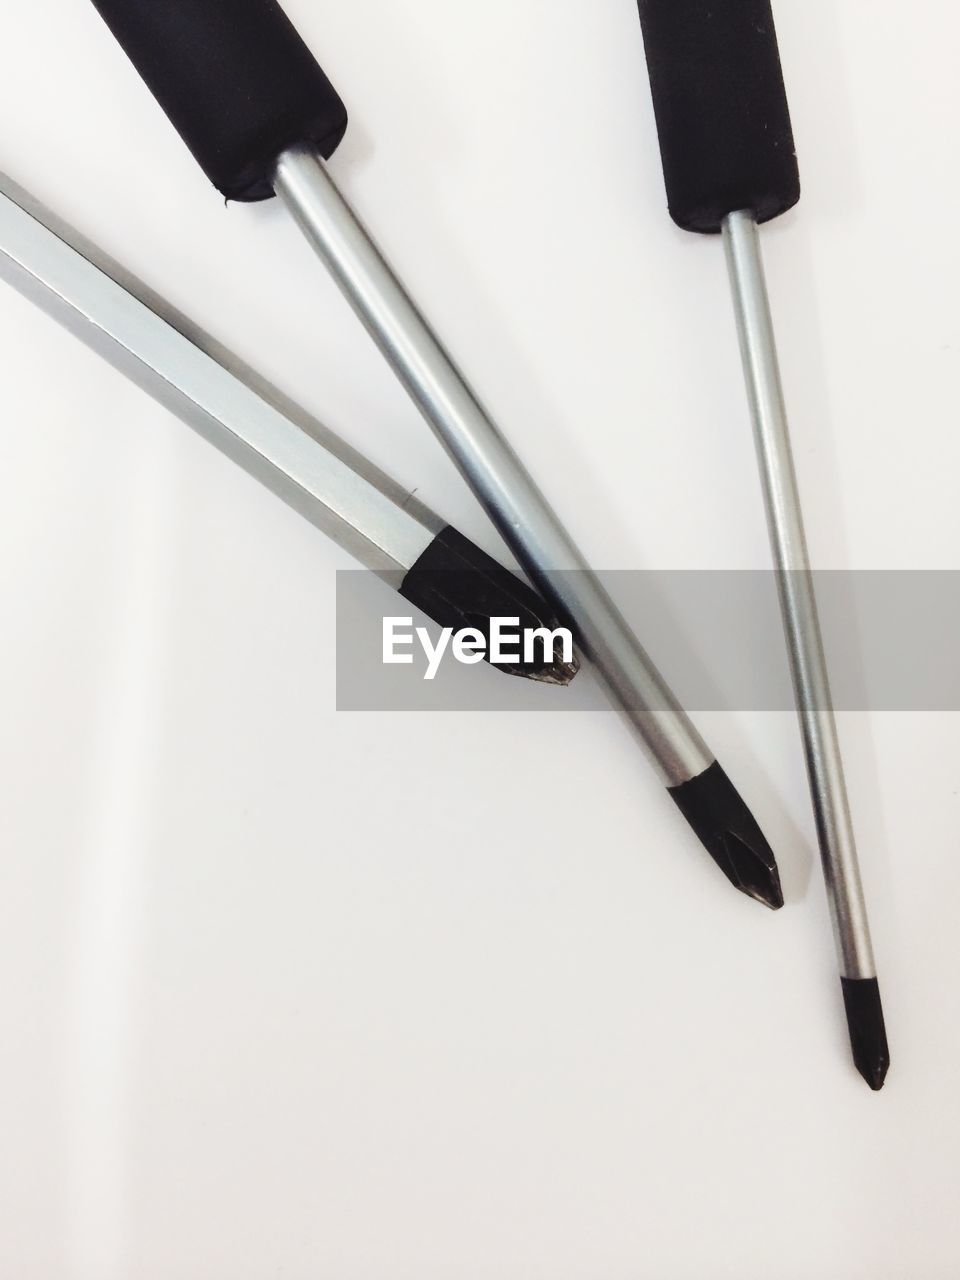 Cropped image of various screwdrivers against white background